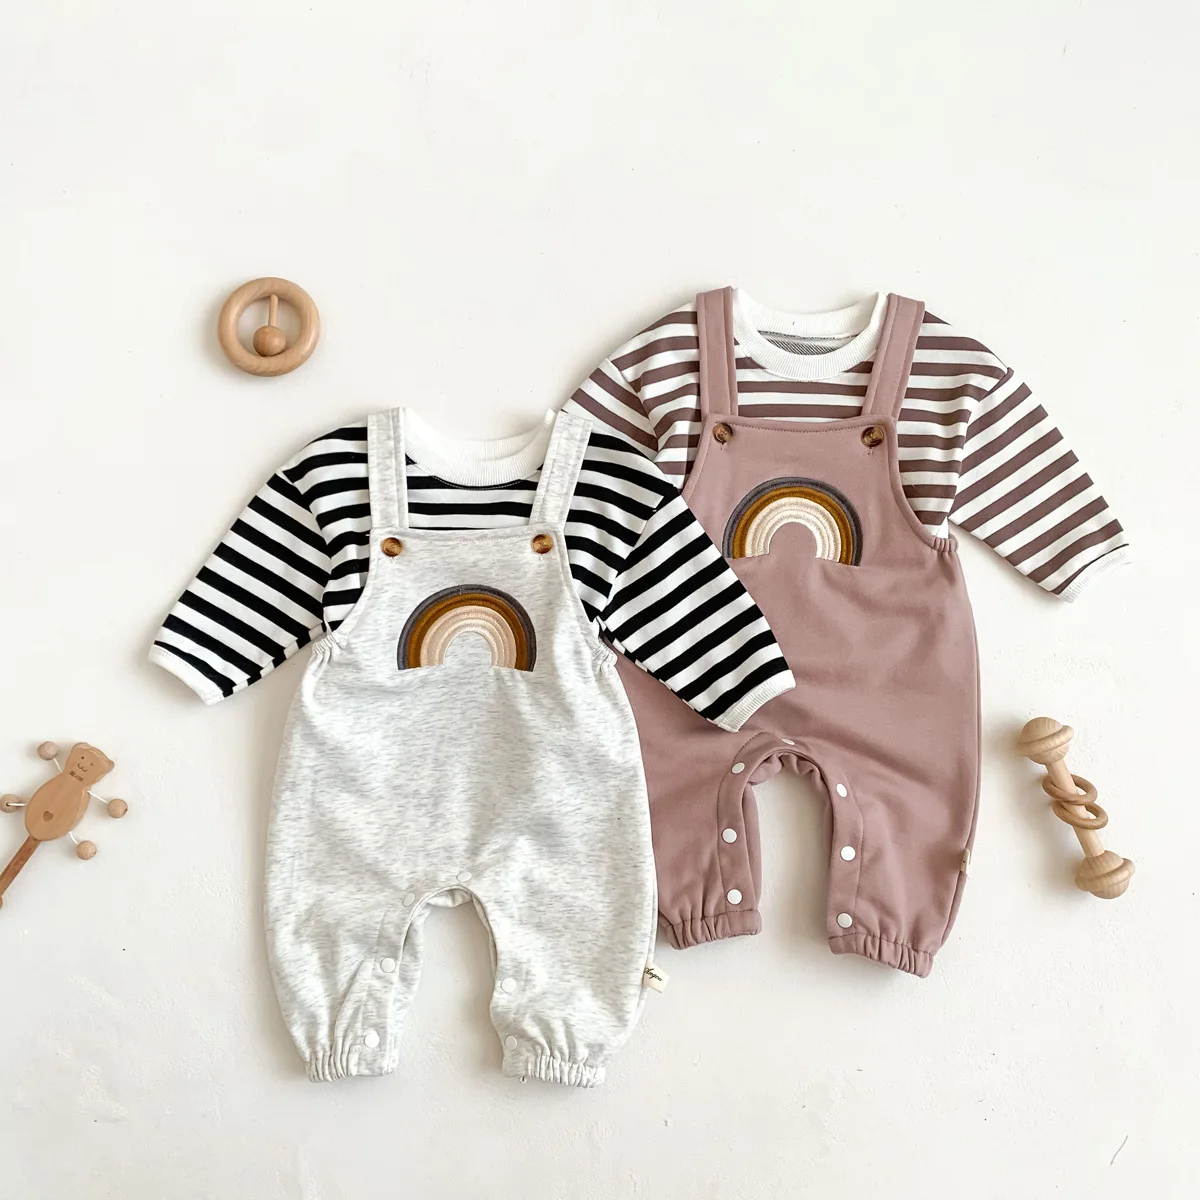 Spring and Autumn New Style Girls Clothes A Beautiful Rainbow Baby Suspenders Two Piece Striped T-shirt 0-3Y Boy Baby Suit